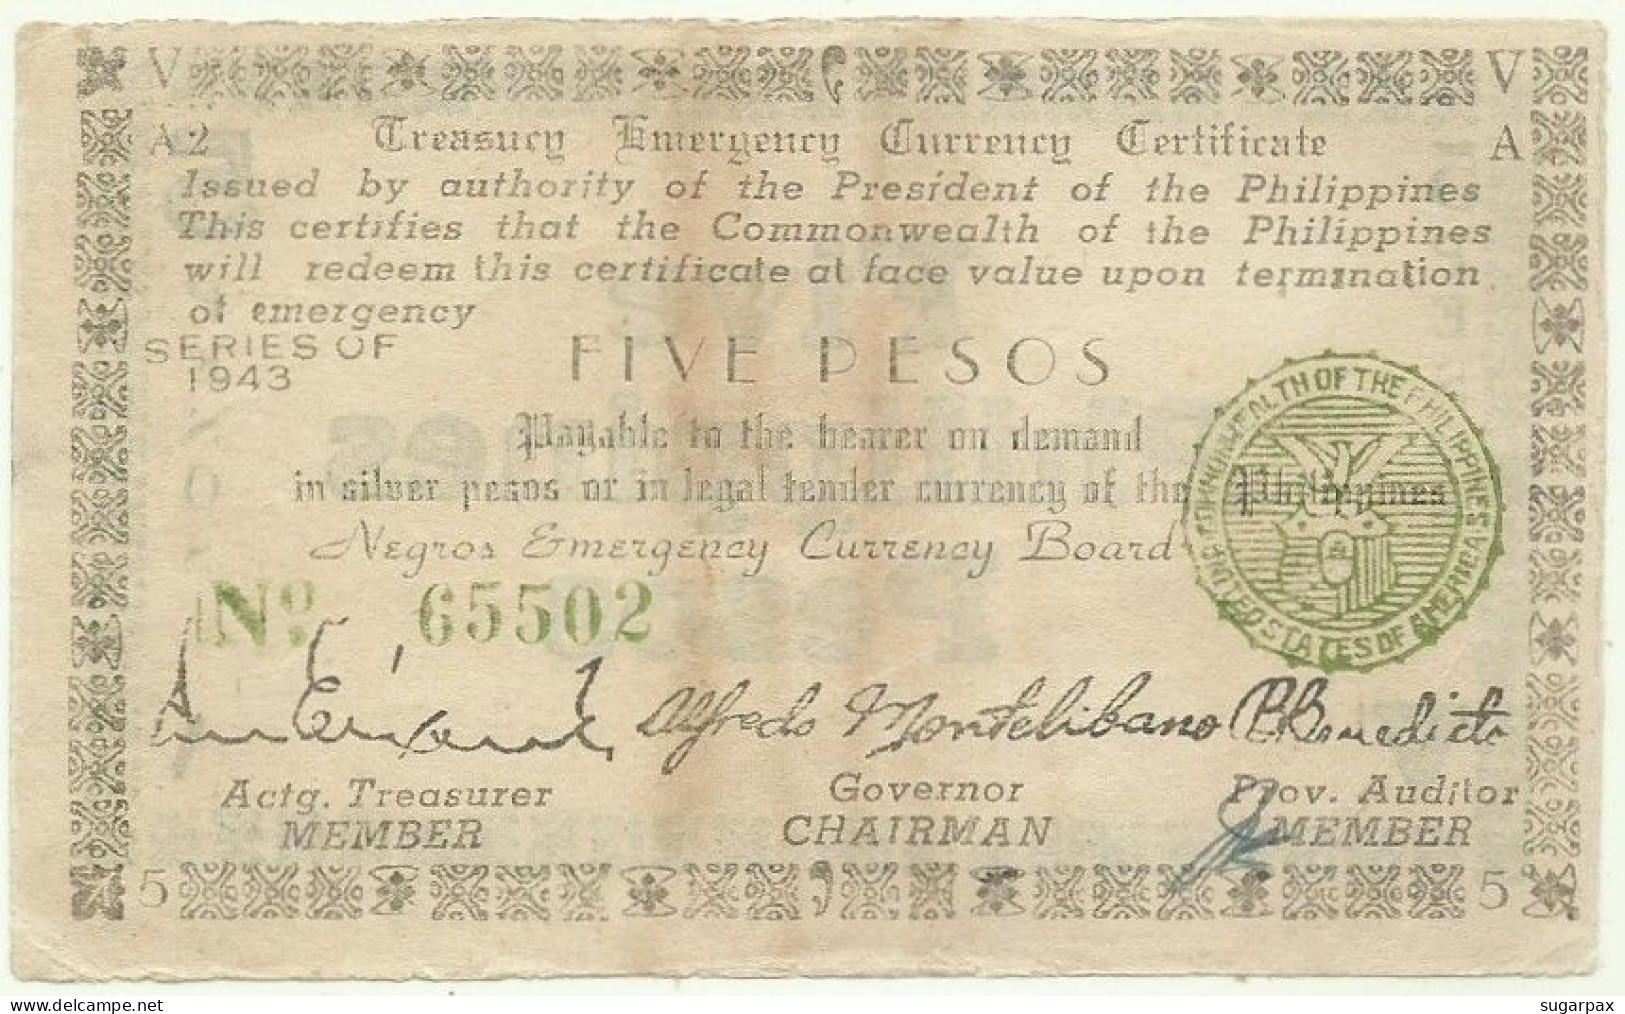 PHILIPPINES - 5 Pesos - 1943 - Pick S 662 - Serie A2 - Negros Emergency Currency Board - Philippines